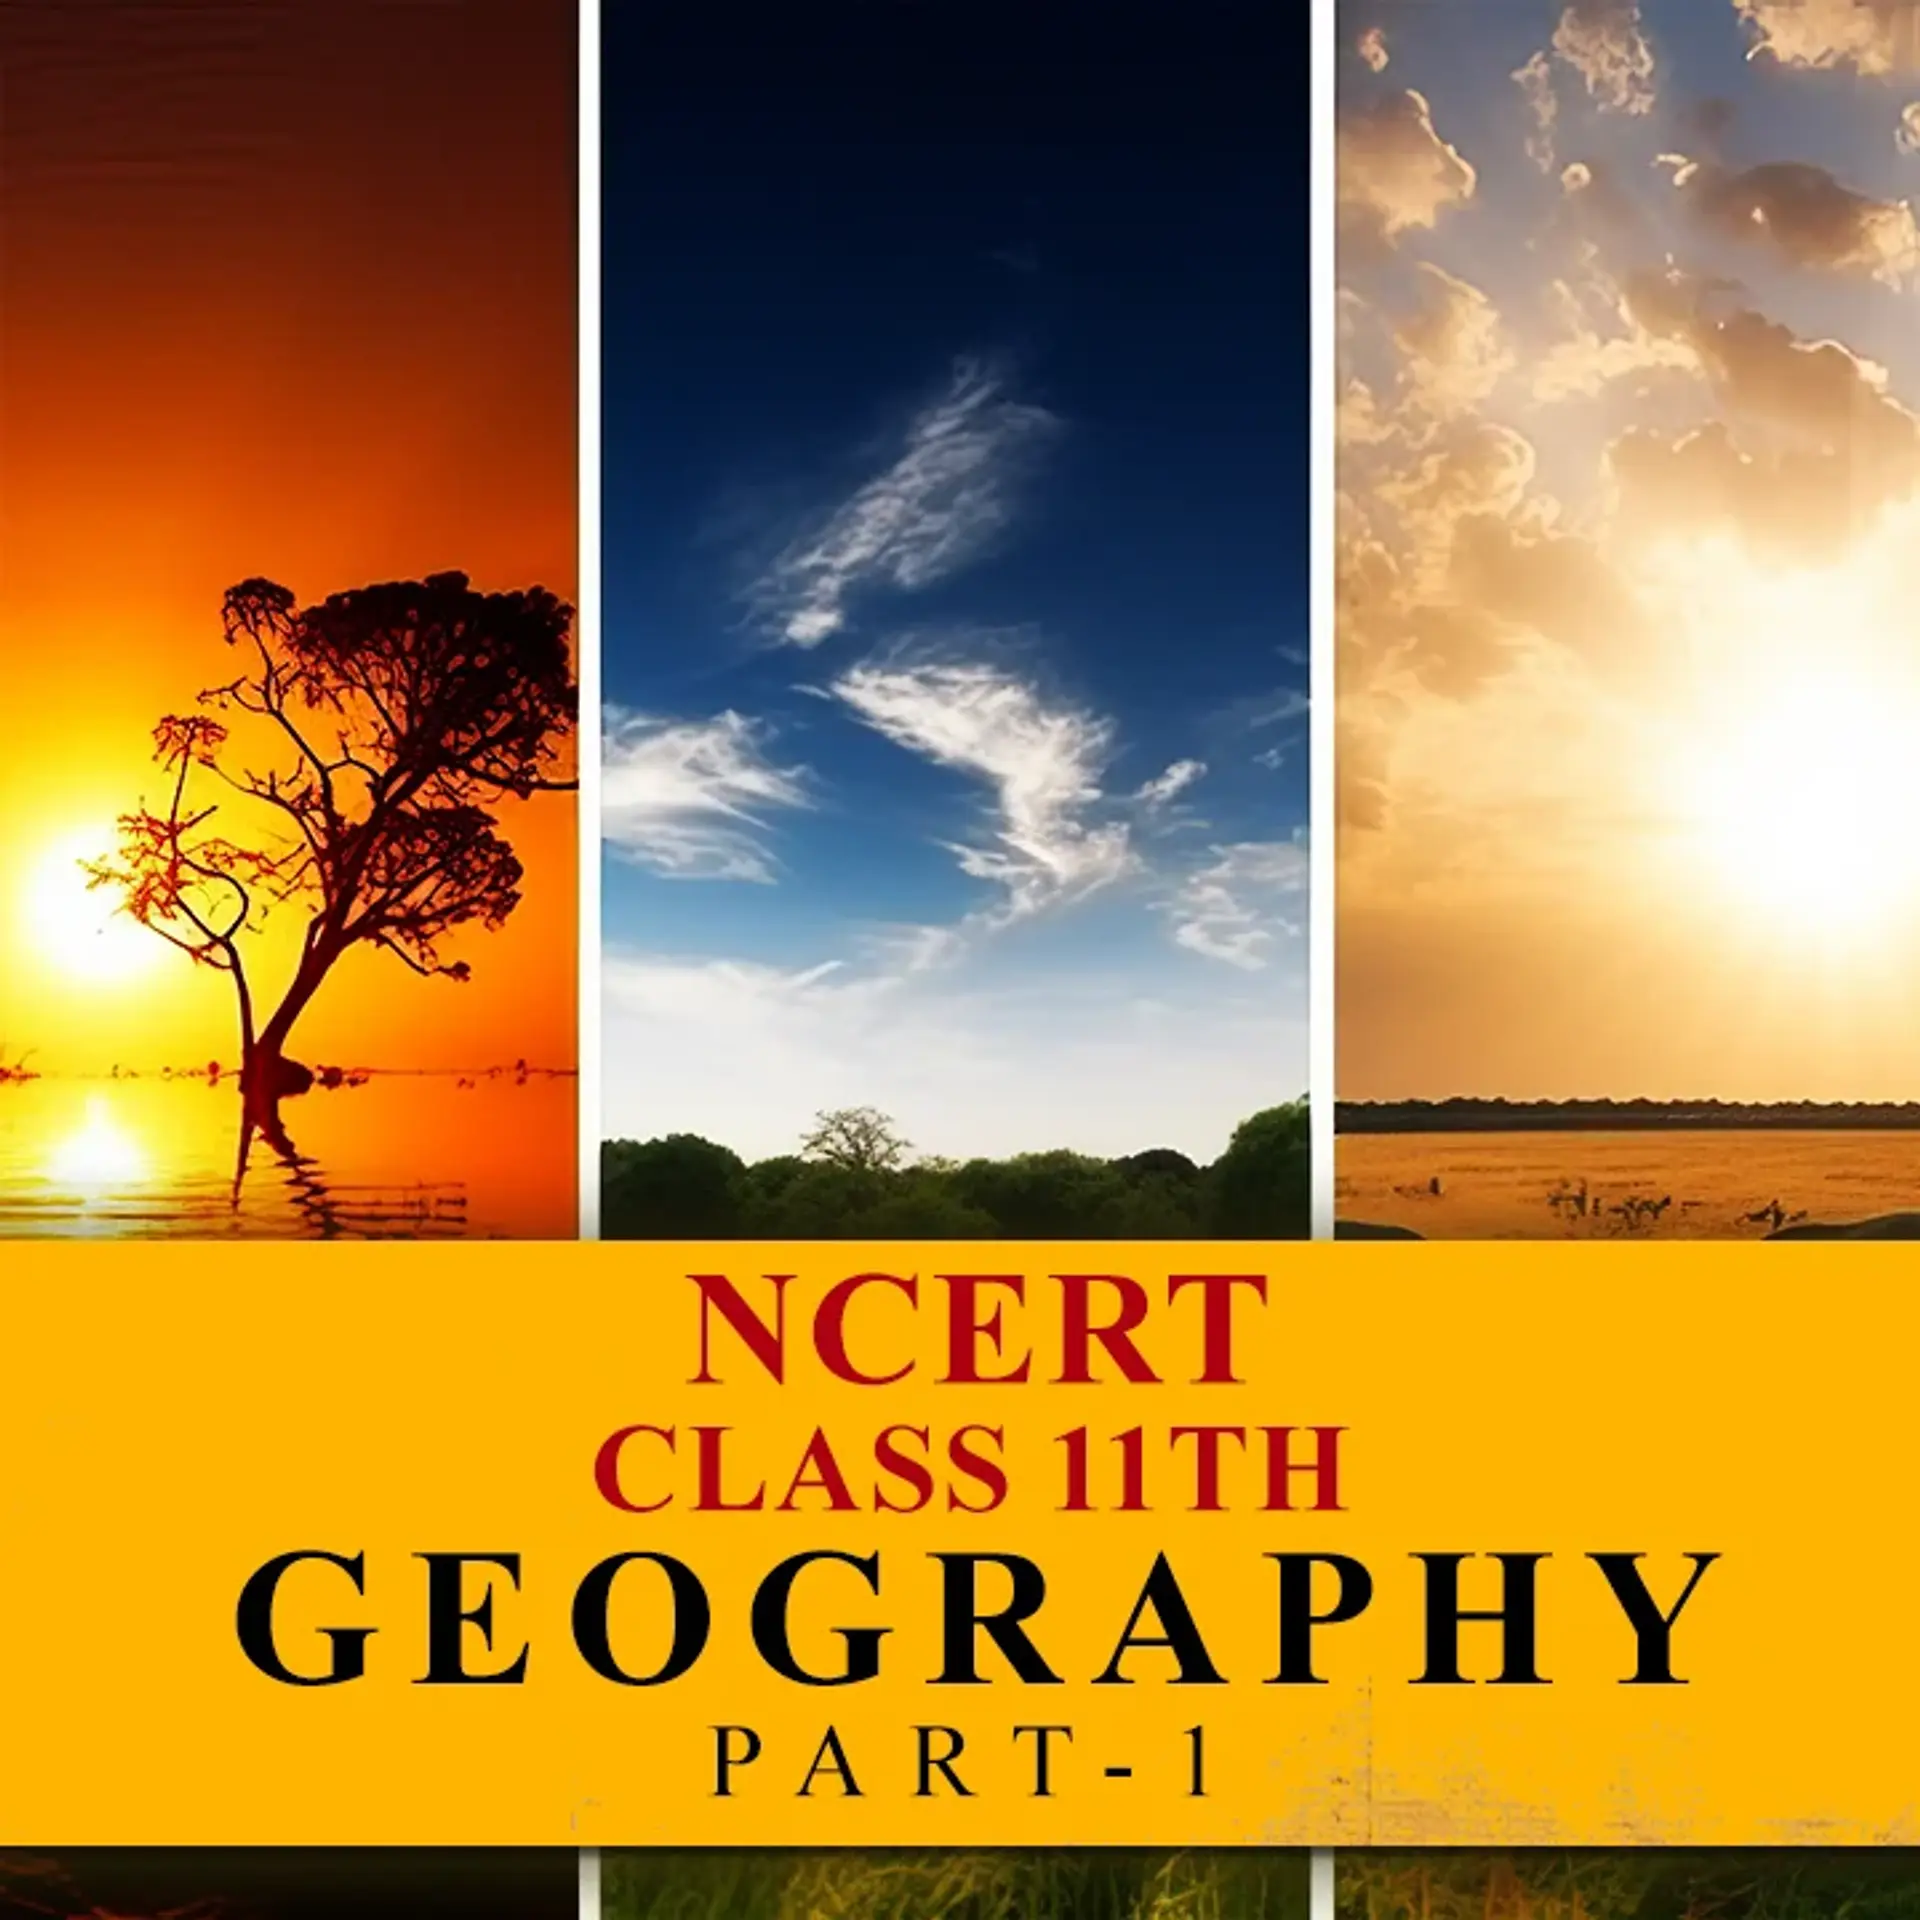 NCERT Class 11th Geography Part-1 | 